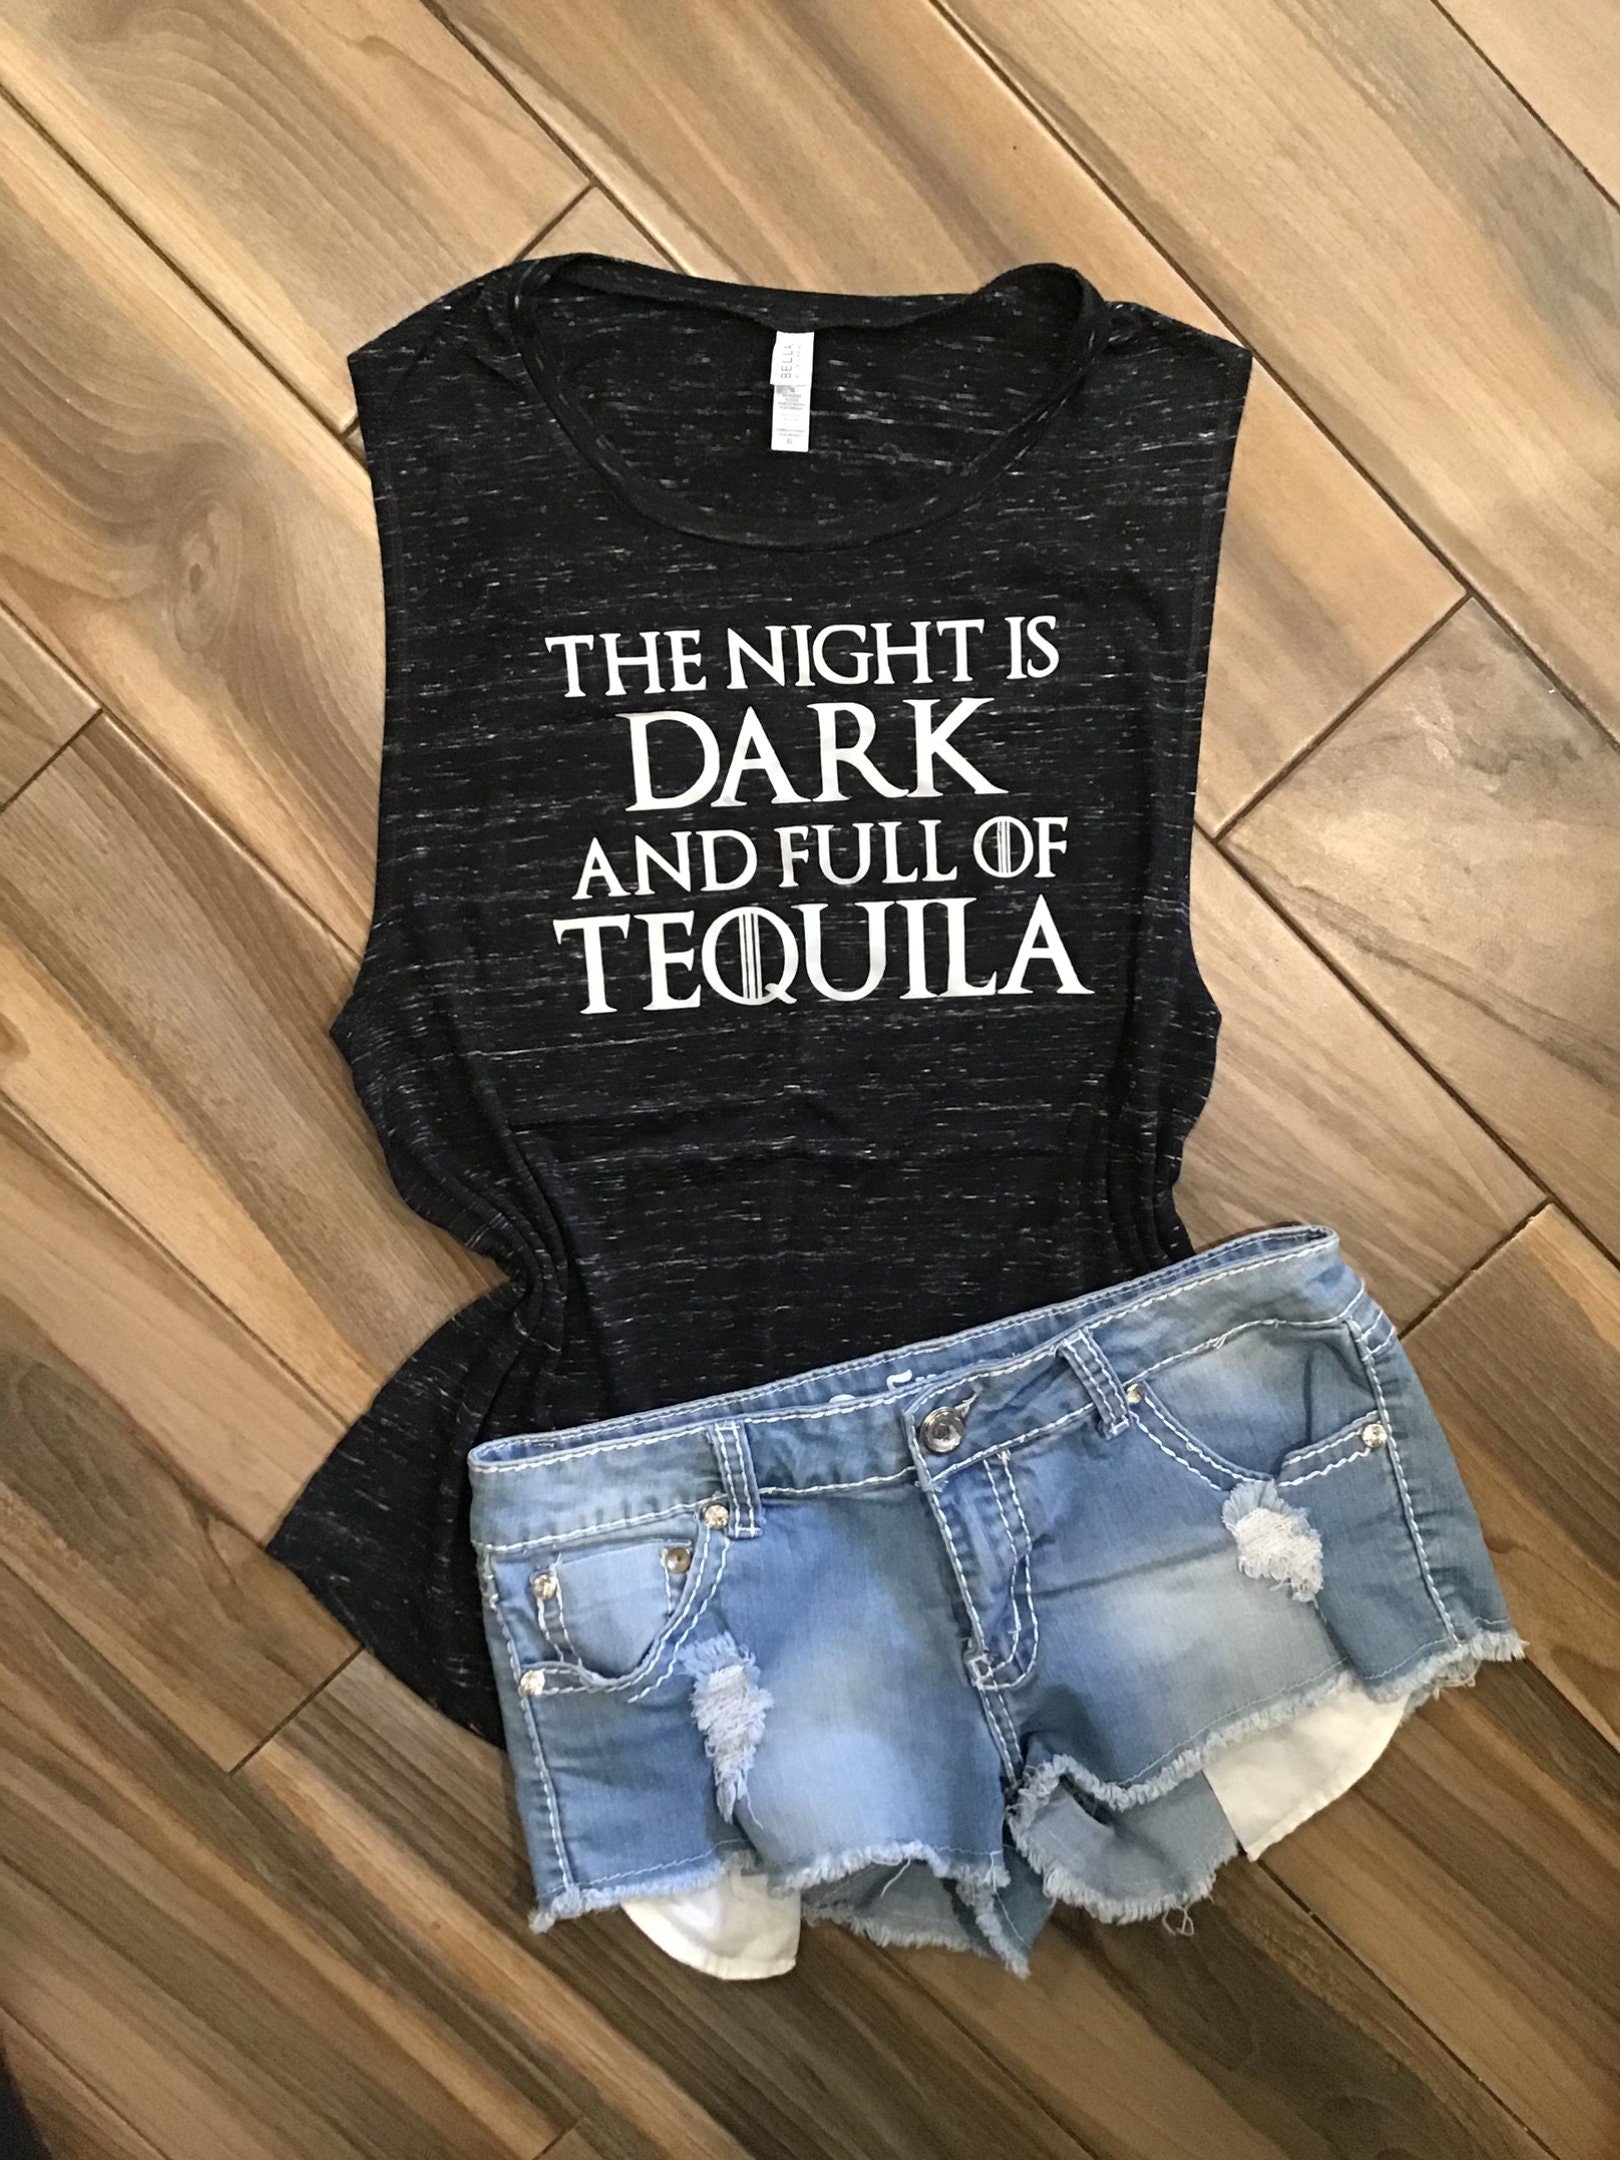 This Night is Dark and Full of Tequila Shirt / Funny Tequila Shirt / Vacation Tee / Thrones Drinking Tee / Tequila Tee